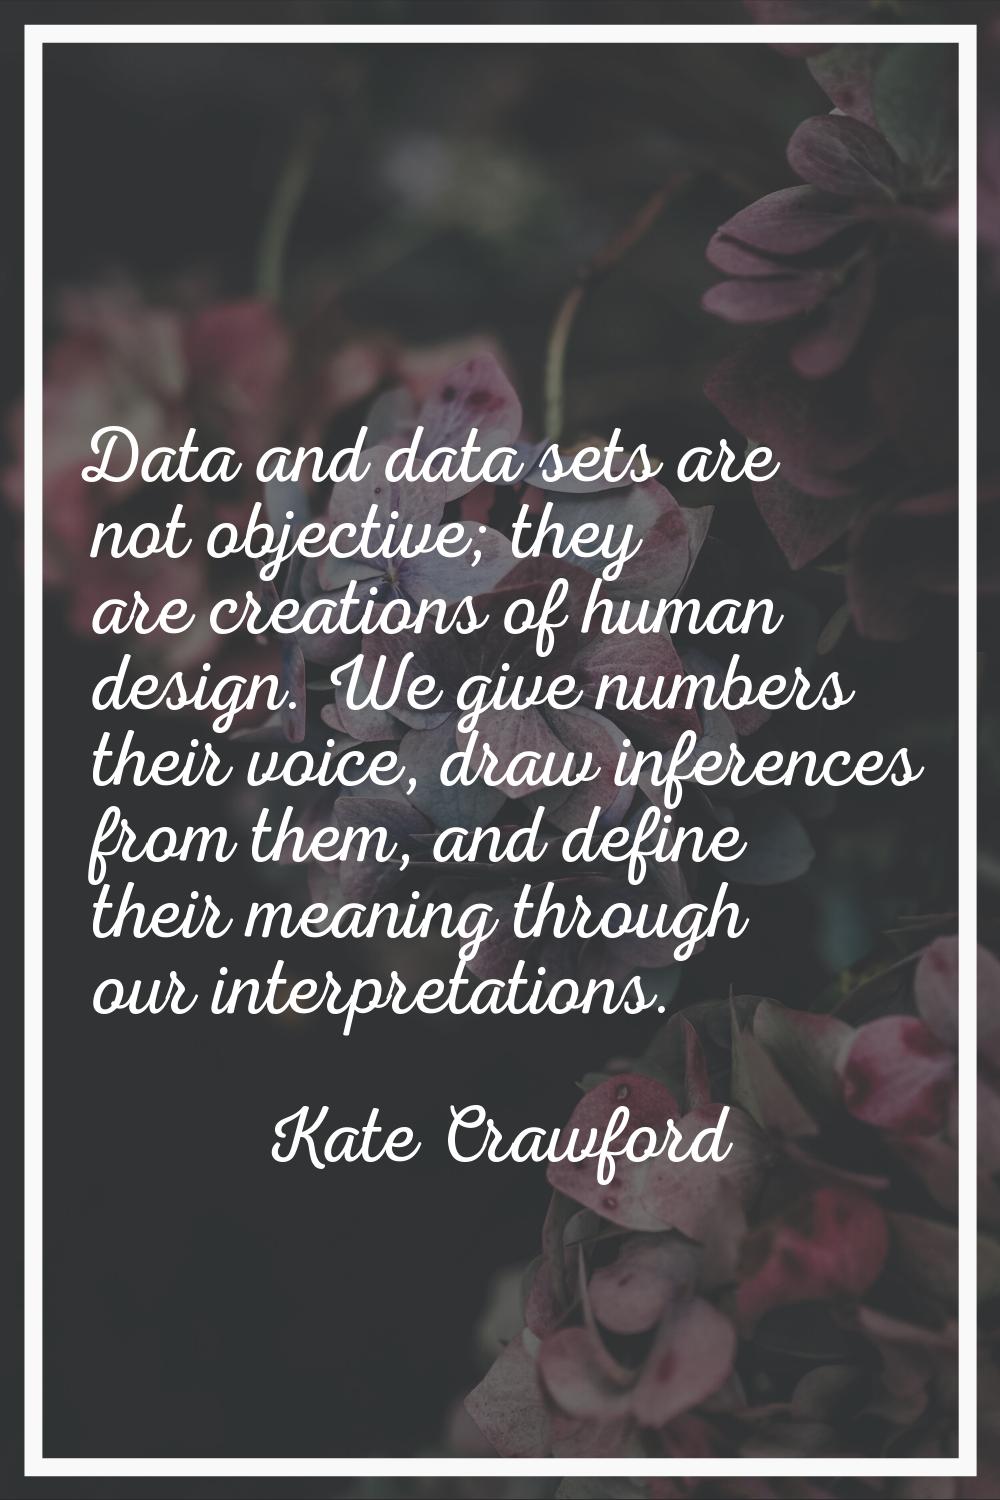 Data and data sets are not objective; they are creations of human design. We give numbers their voi